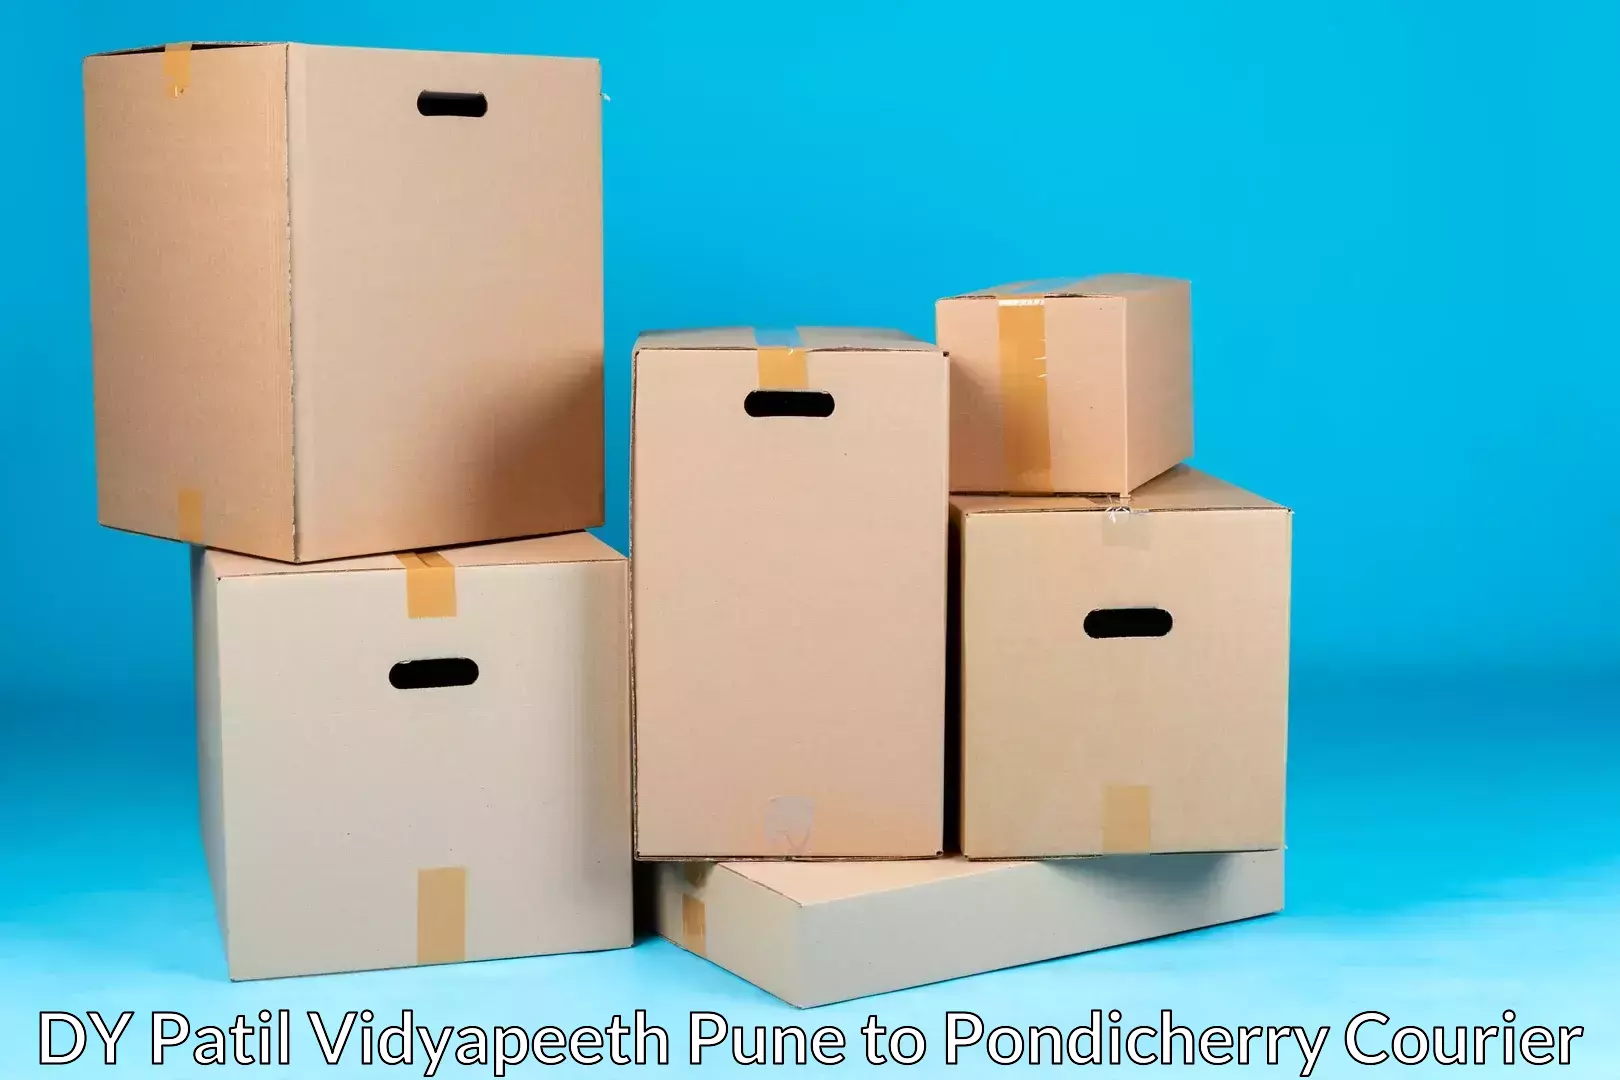 Full home relocation services DY Patil Vidyapeeth Pune to Metttupalayam